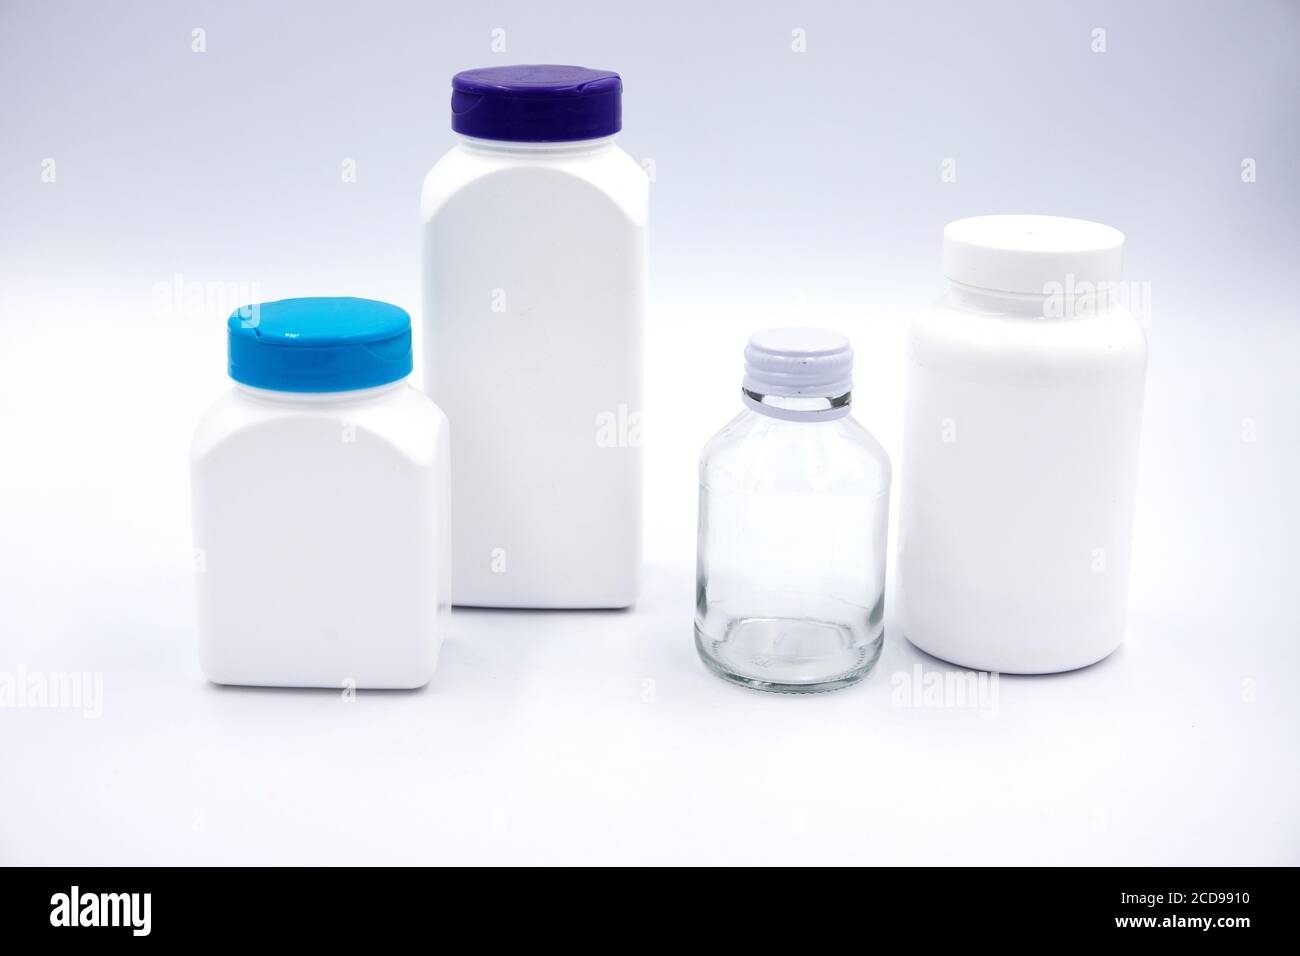 White plastic bottles for pills or food supplement studio photo on white background. Set of pharmacologic container mockup. Pill or drug jar blank pac Stock Photo